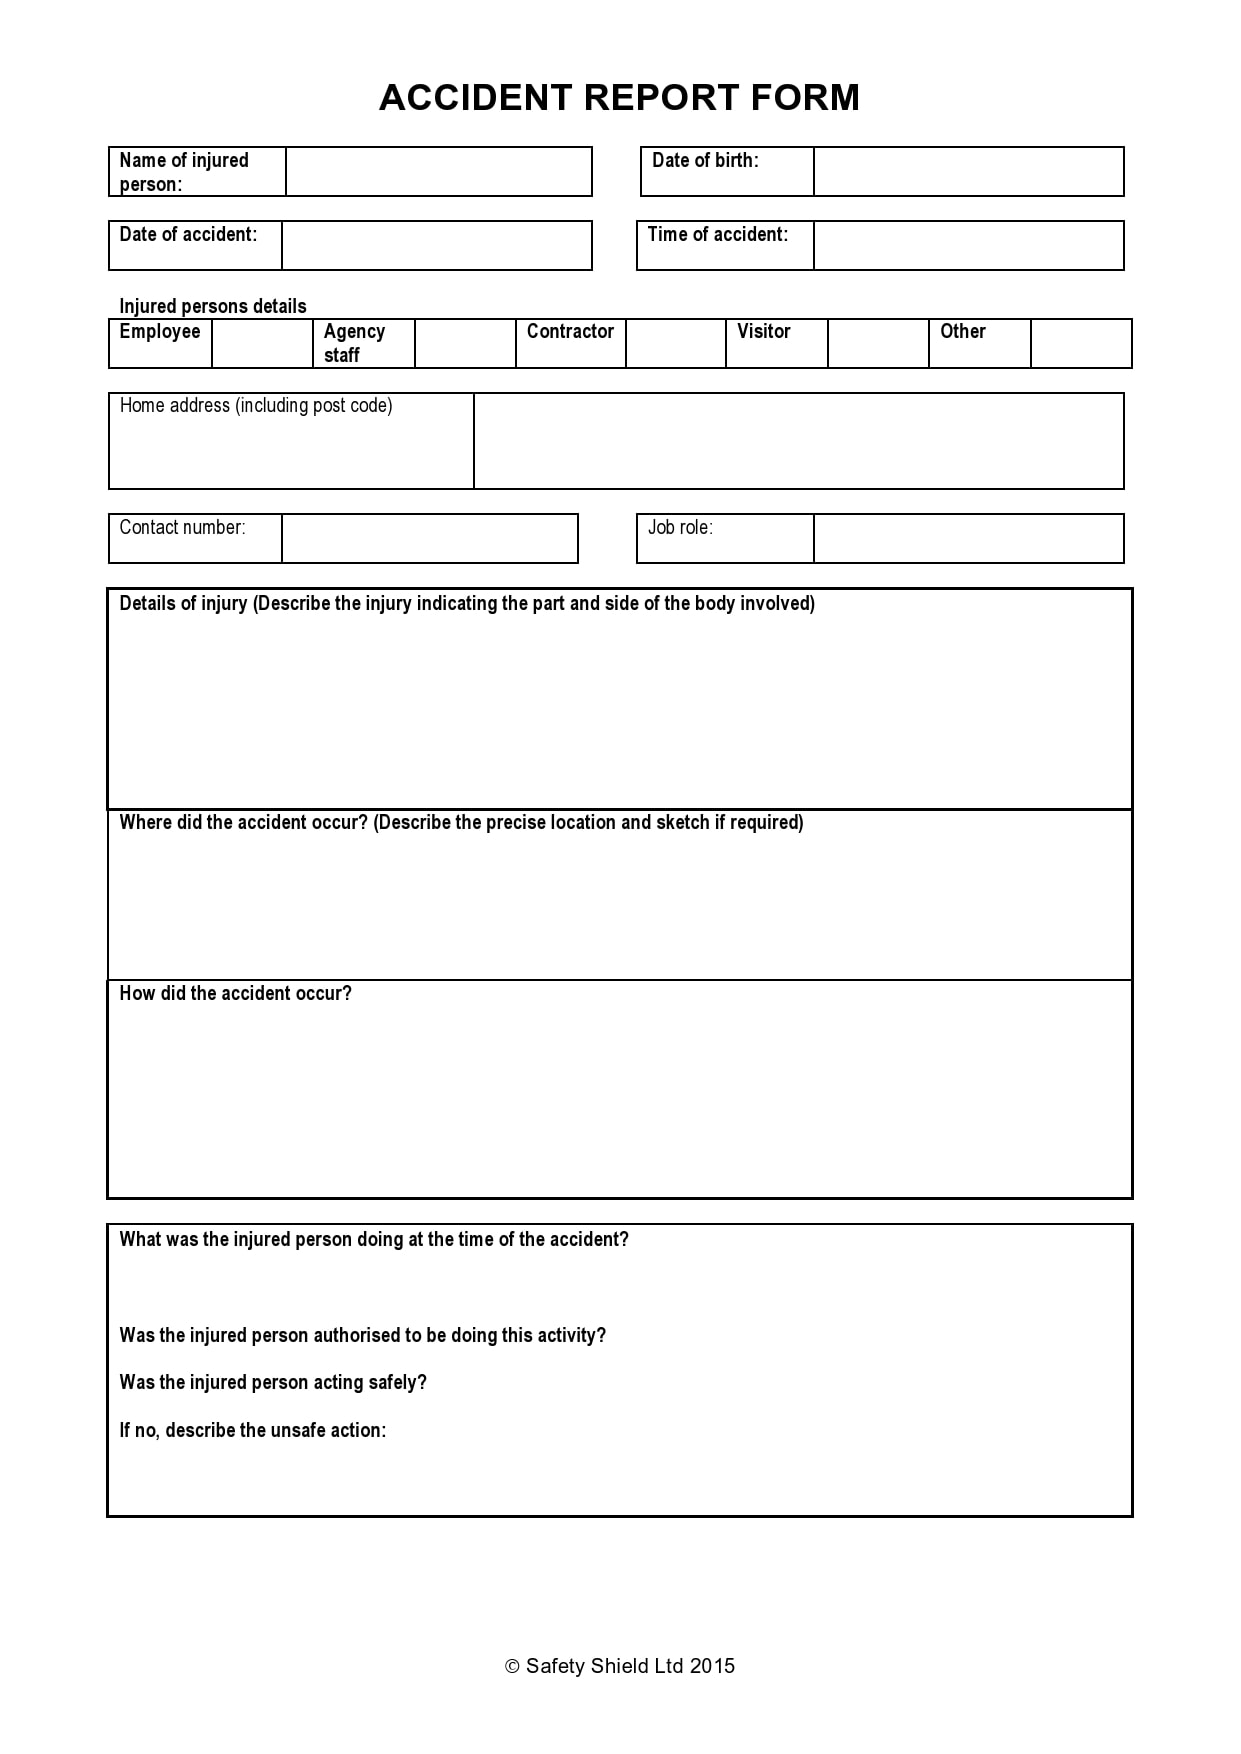 23 Accident Report Forms (Car, Work Injury, more) - TemplateArchive Regarding Motor Vehicle Accident Report Form Template